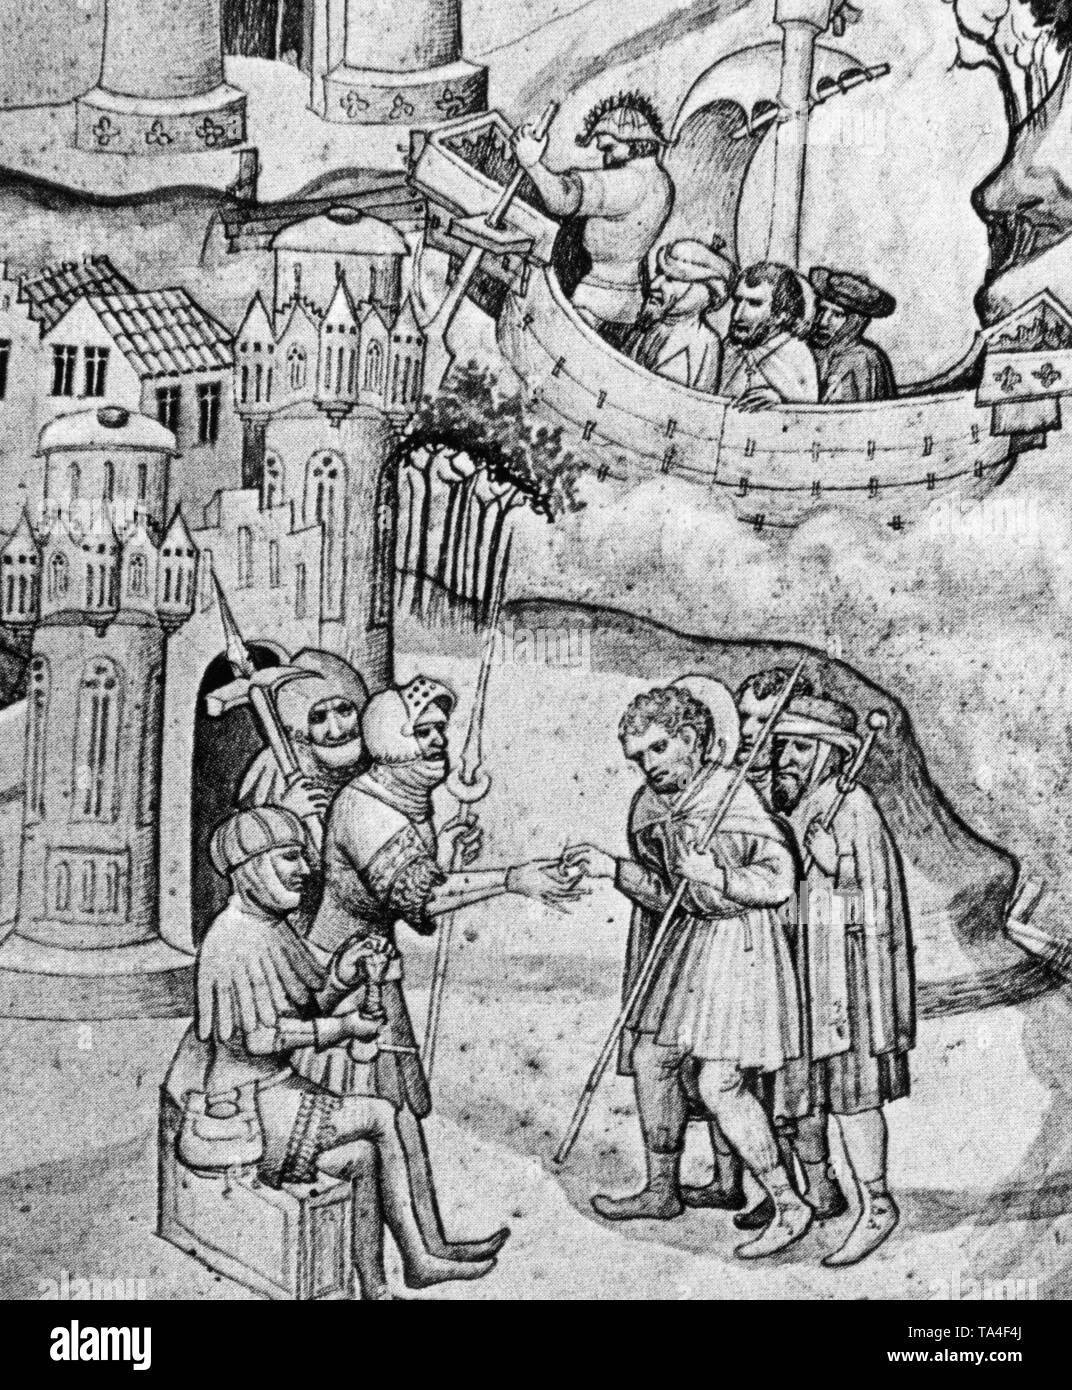 Illustration from a medieval manuscript: Pilgrims paying toll in Jaffa on their way to Jerusalem. Stock Photo